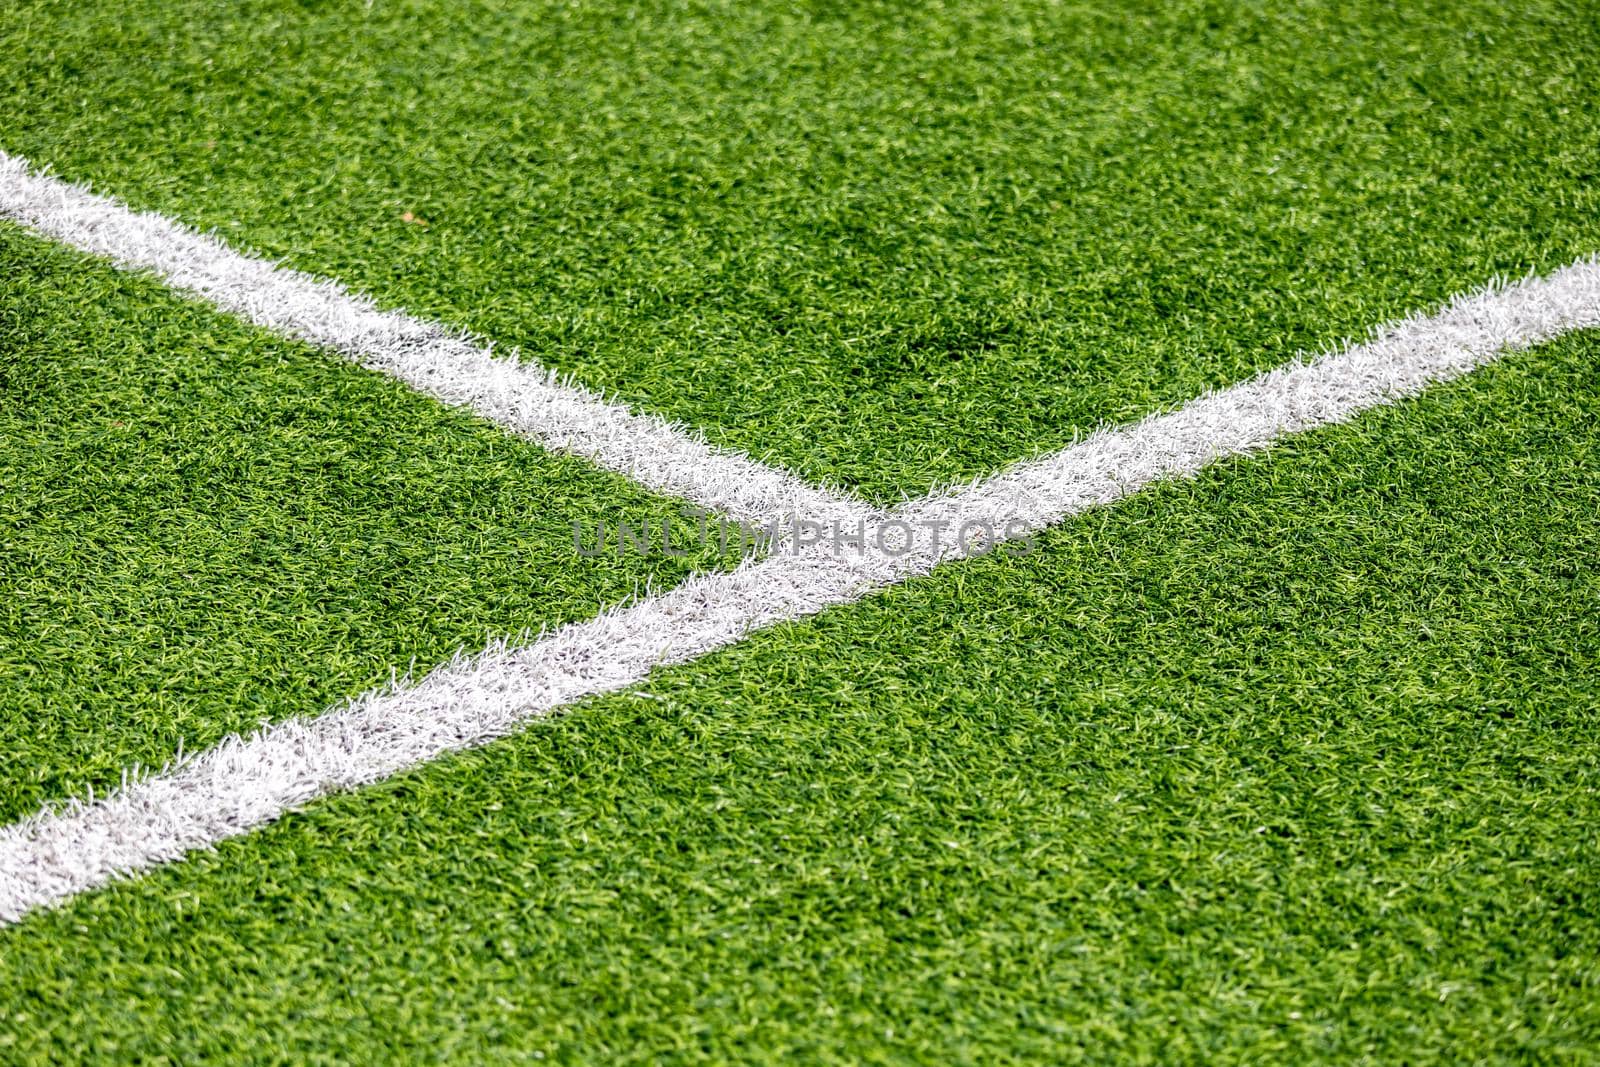 white marking lines on a green football field